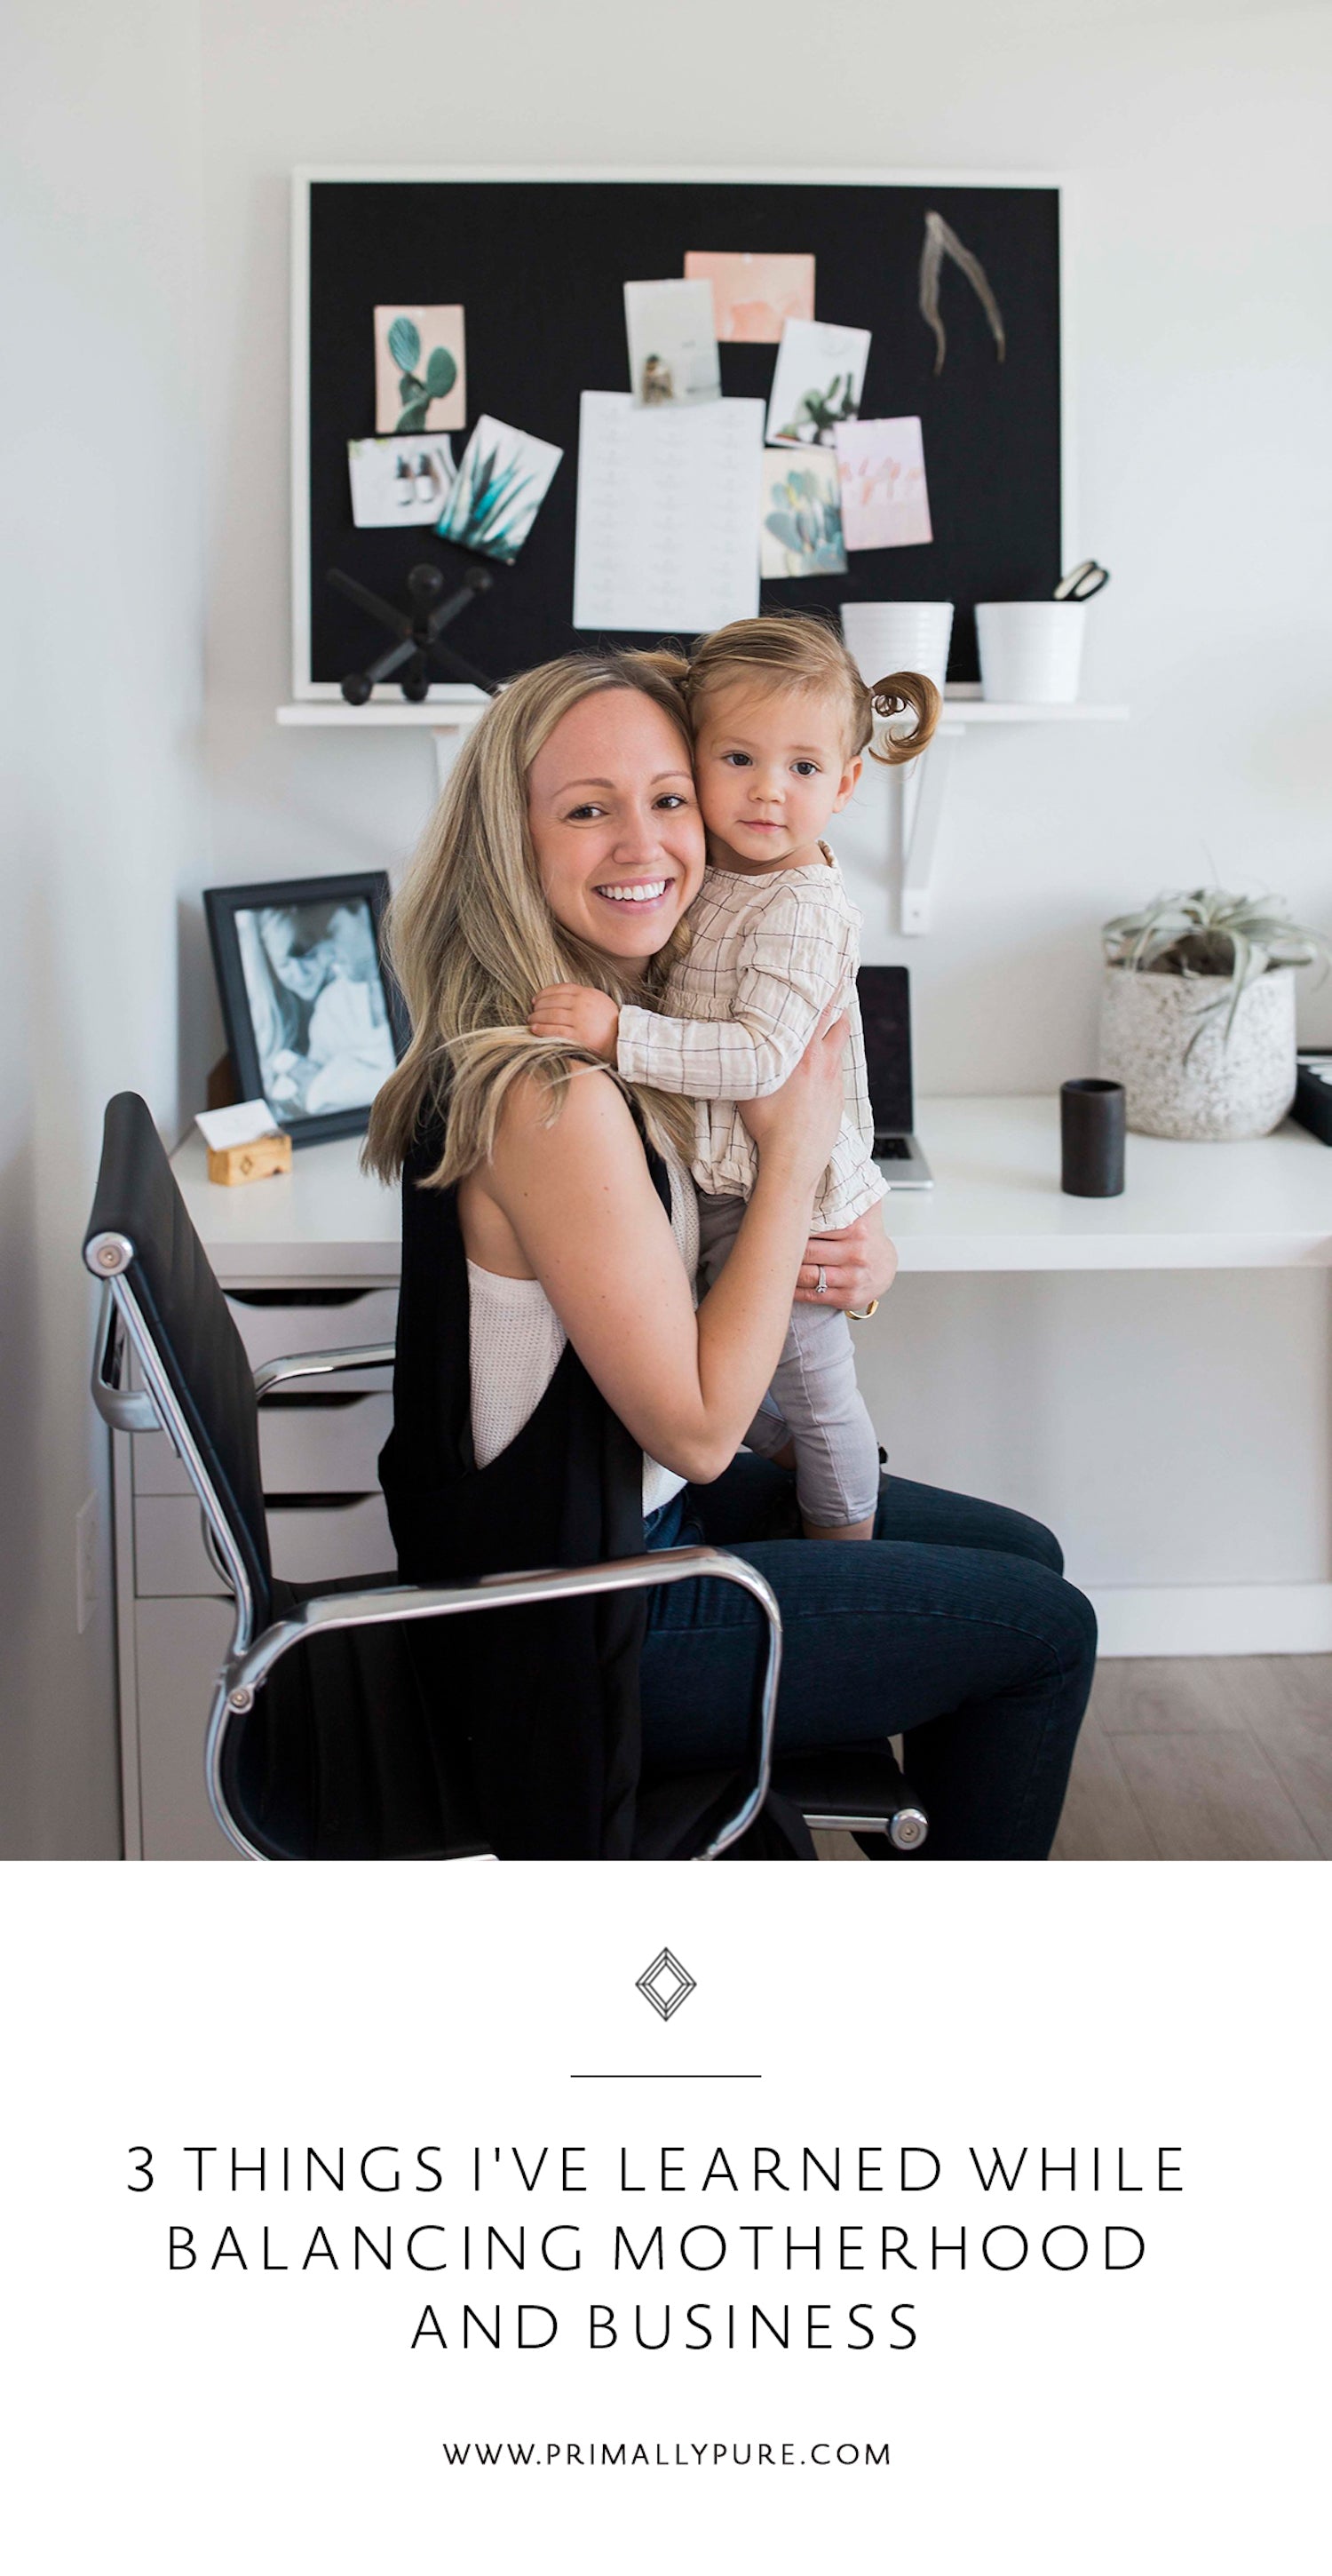 3 Things I've Learned While Balancing Business and Motherhood